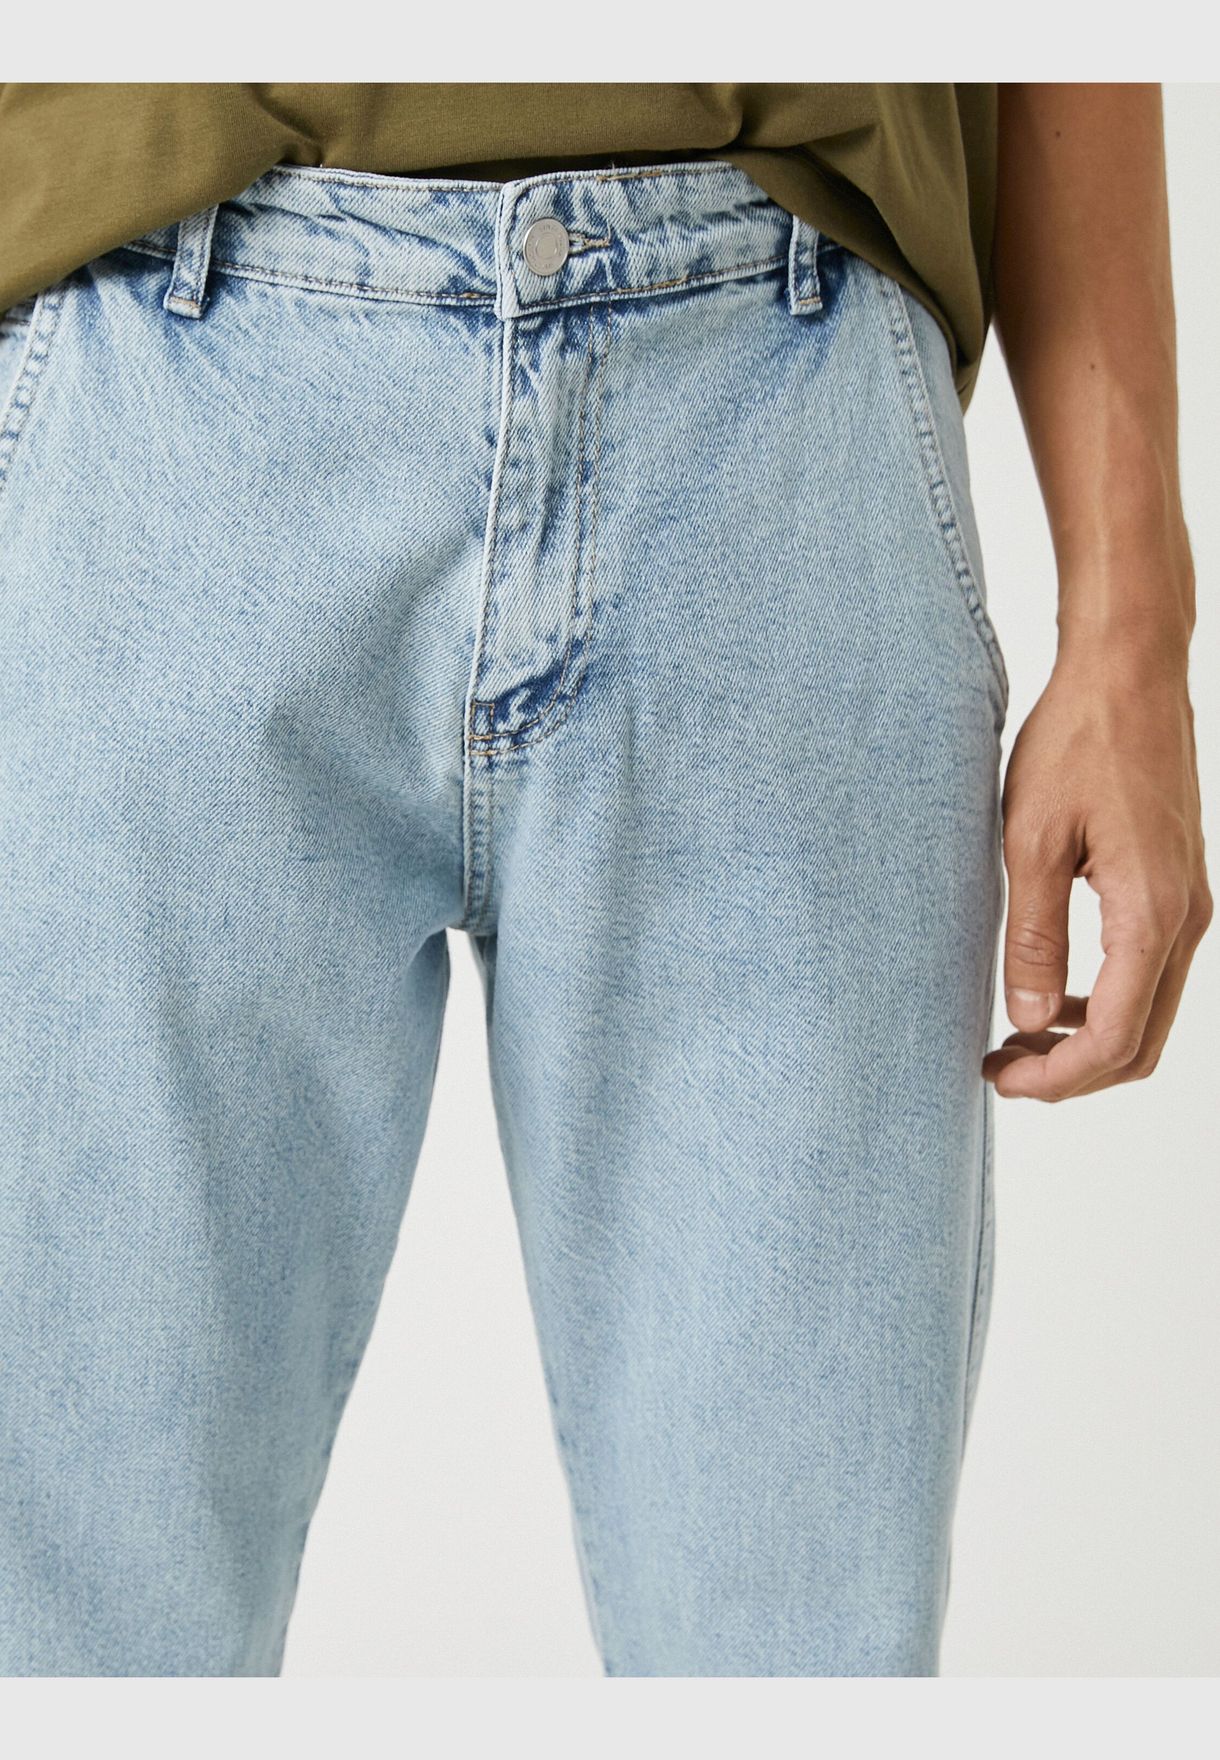 Jogger Jean Trousers Buttoned Pocket Detailed Cotton